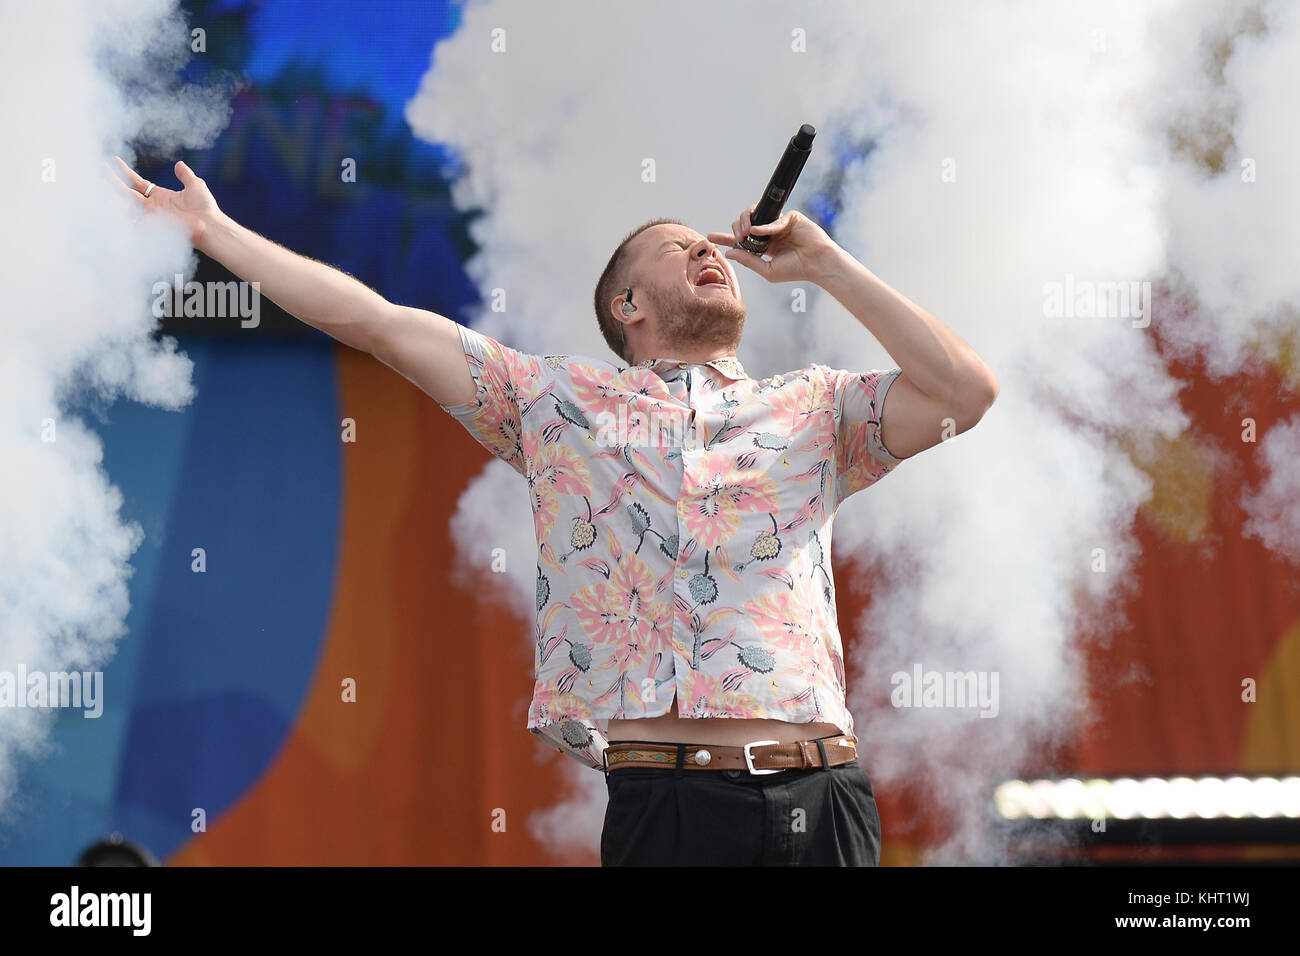 NEW YORK, NY - JULY 28: Lead singer Dan Reynolds and his band Imagine Dragons perform on ABC's 'Good Morning America' at Rumsey Playfield on July 28, 2017 in New York City.  People:  Dan Reynolds Stock Photo